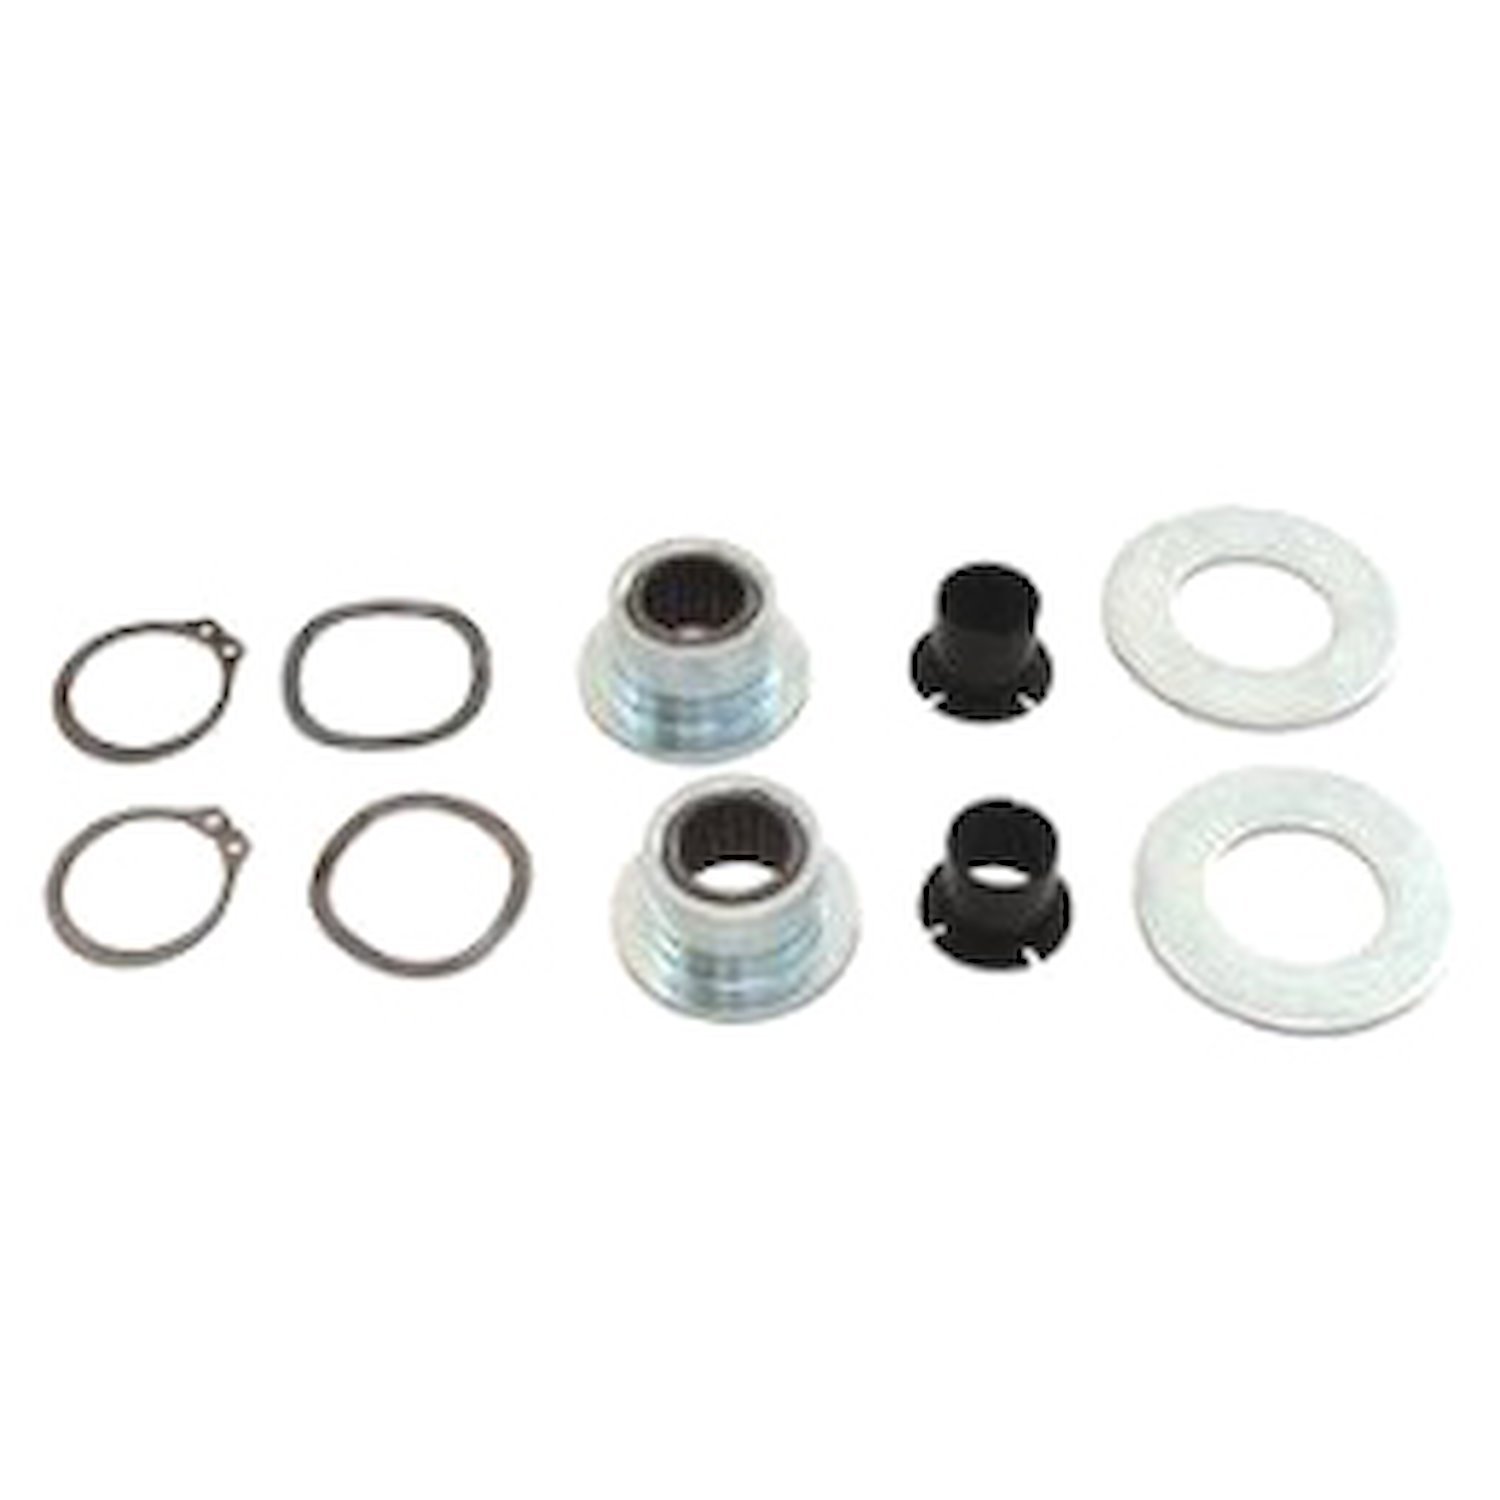 Pedal Support Roller Bushings 1964-1973 Ford Mustang